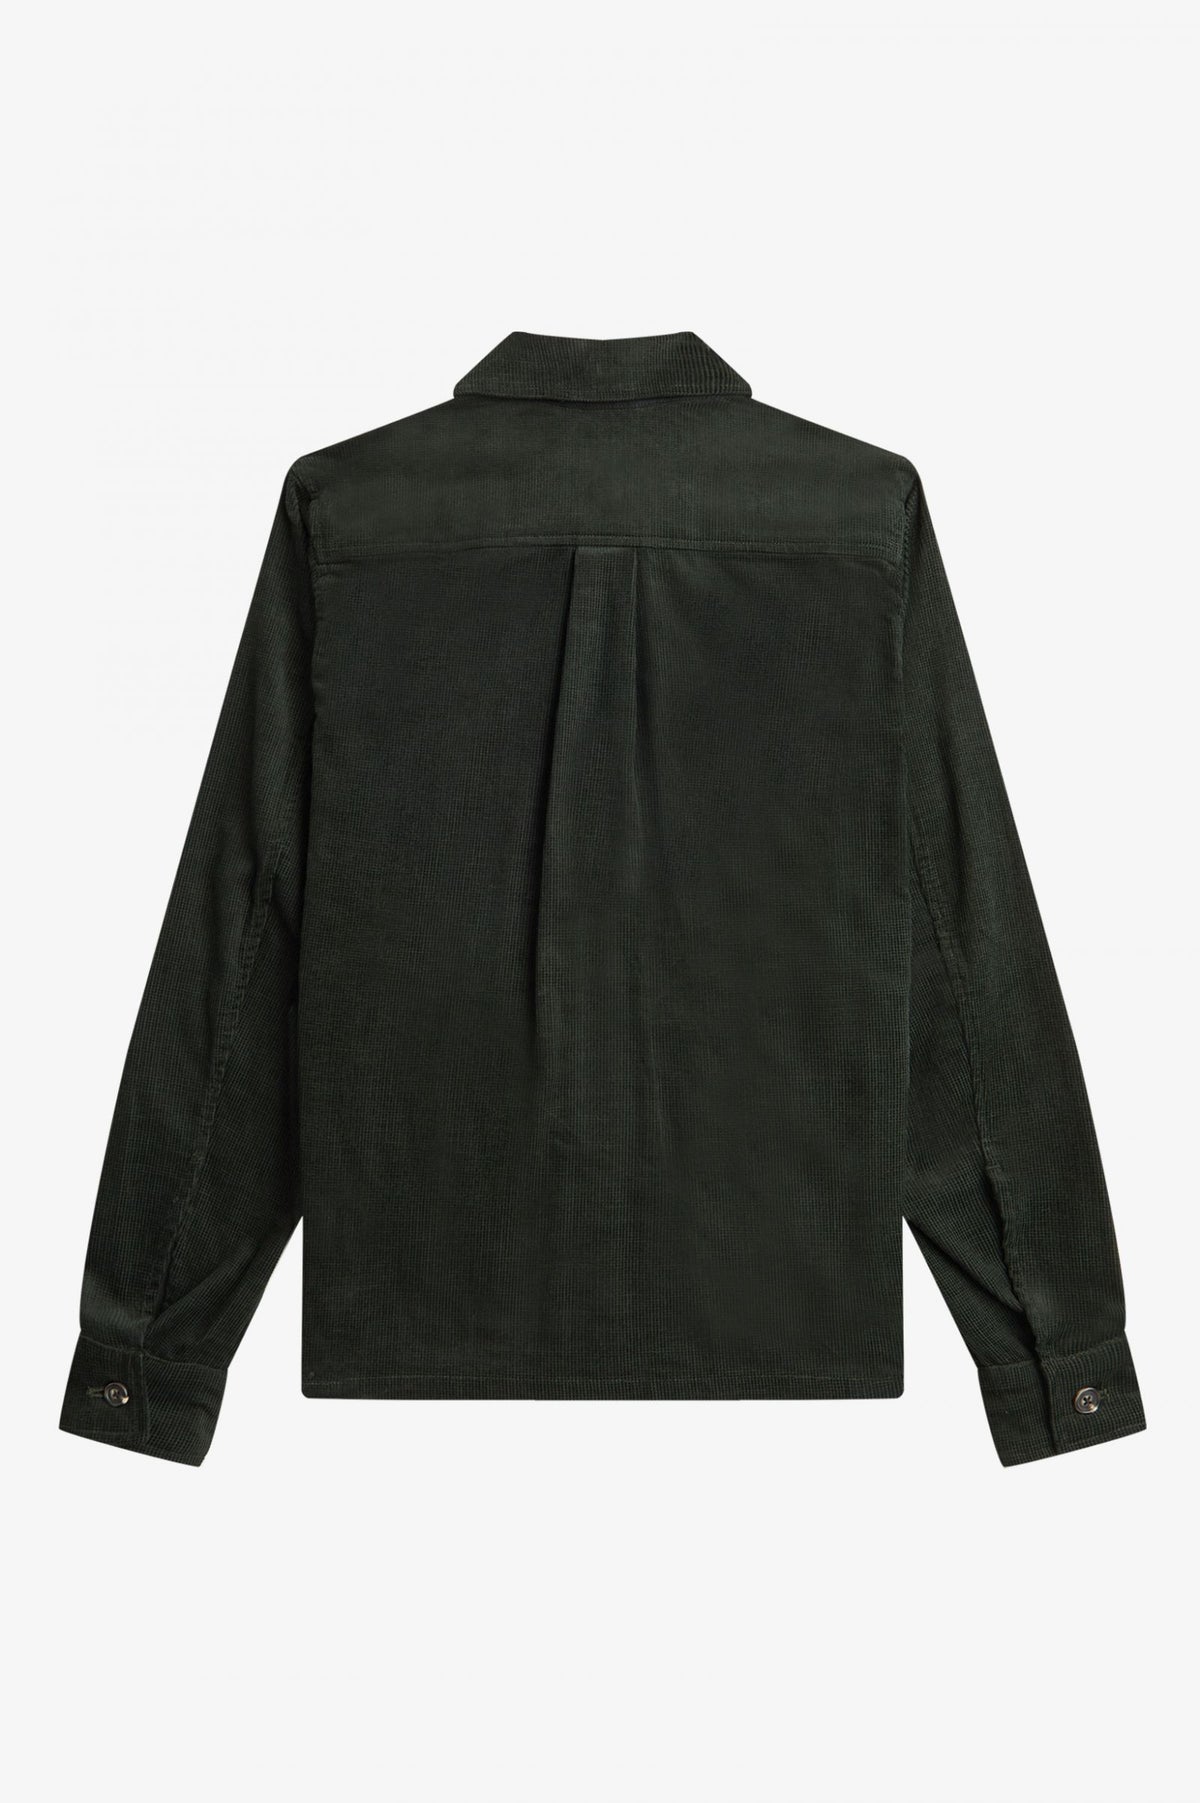 FRED PERRY M6595 OVERSHIRT - NIGHT GREEN